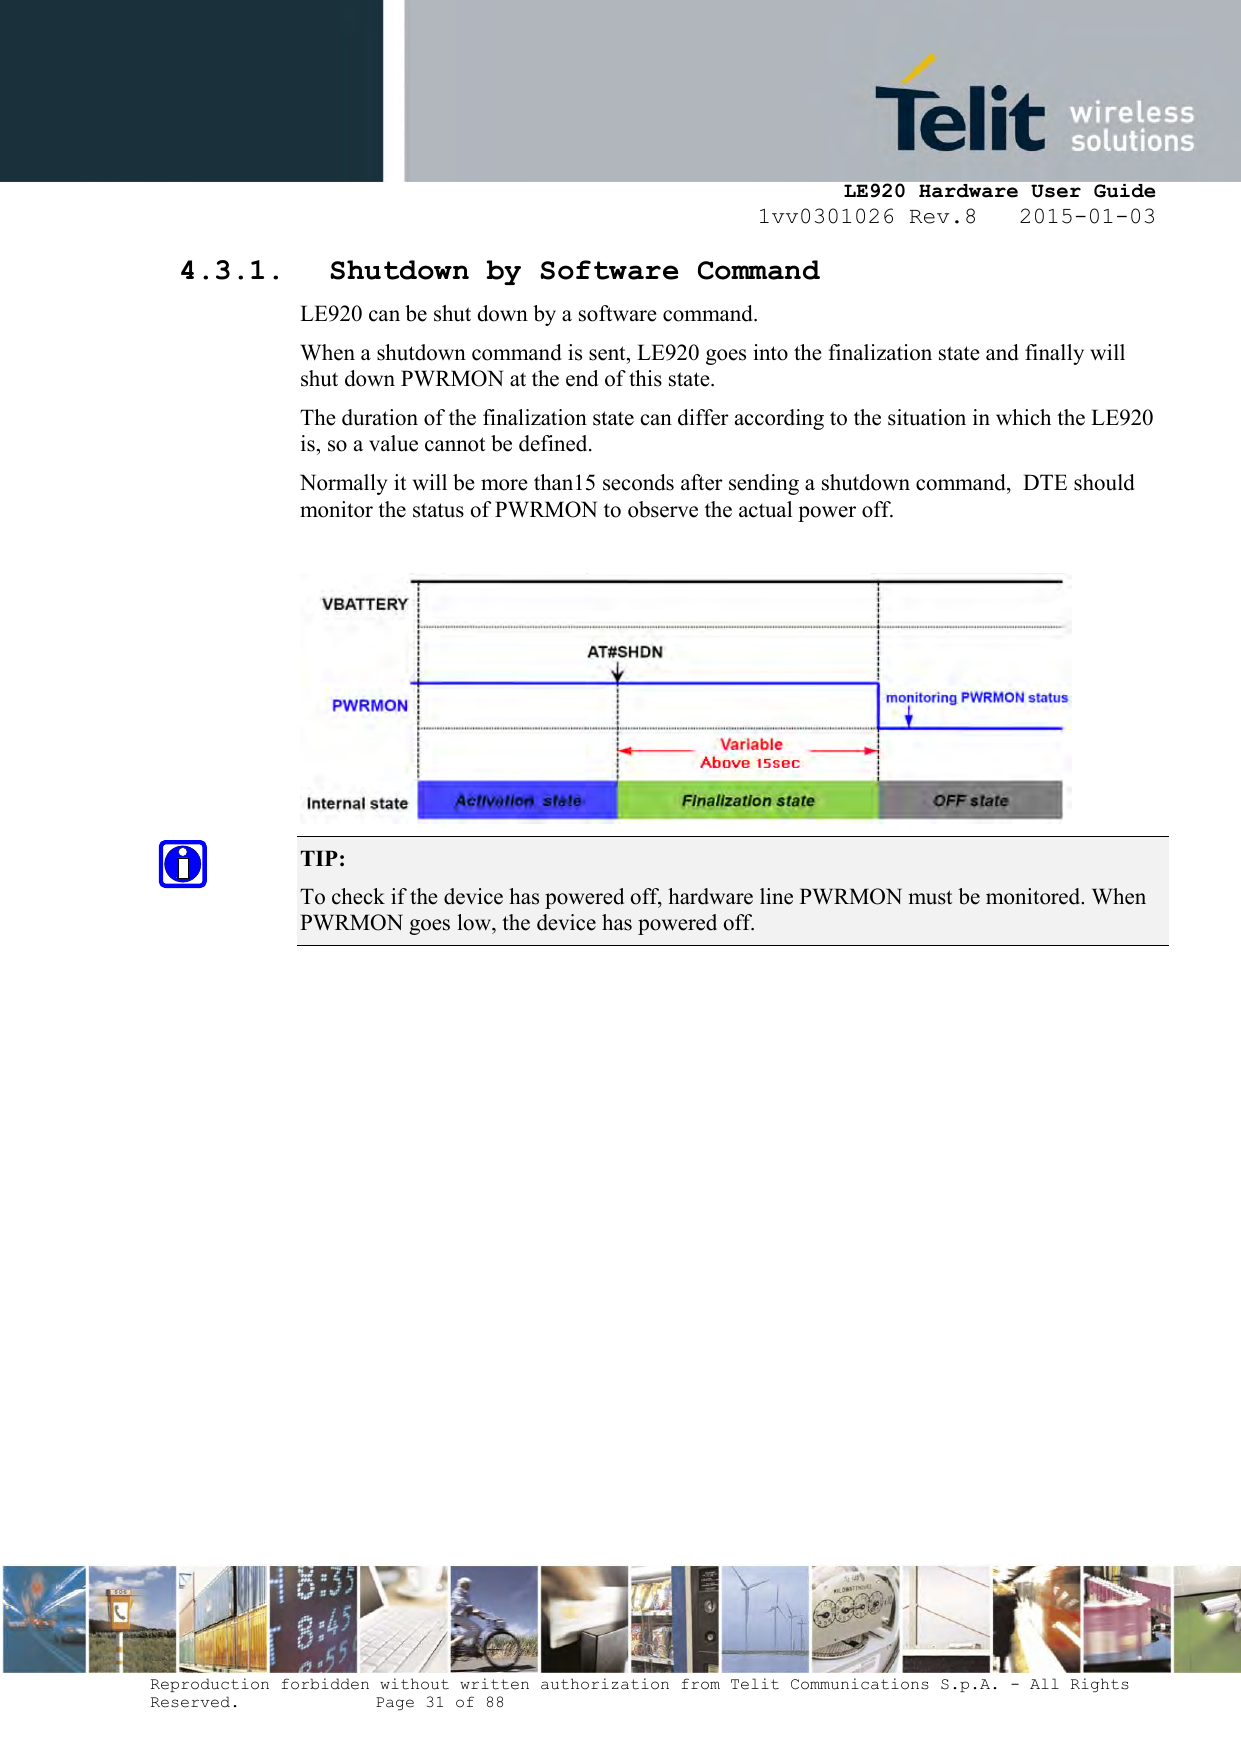     LE920 Hardware User Guide 1vv0301026 Rev.8   2015-01-03 Reproduction forbidden without written authorization from Telit Communications S.p.A. - All Rights Reserved.    Page 31 of 88  4.3.1. Shutdown by Software Command LE920 can be shut down by a software command. When a shutdown command is sent, LE920 goes into the finalization state and finally will shut down PWRMON at the end of this state. The duration of the finalization state can differ according to the situation in which the LE920 is, so a value cannot be defined. Normally it will be more than15 seconds after sending a shutdown command,  DTE should monitor the status of PWRMON to observe the actual power off.   TIP:  To check if the device has powered off, hardware line PWRMON must be monitored. When PWRMON goes low, the device has powered off.  